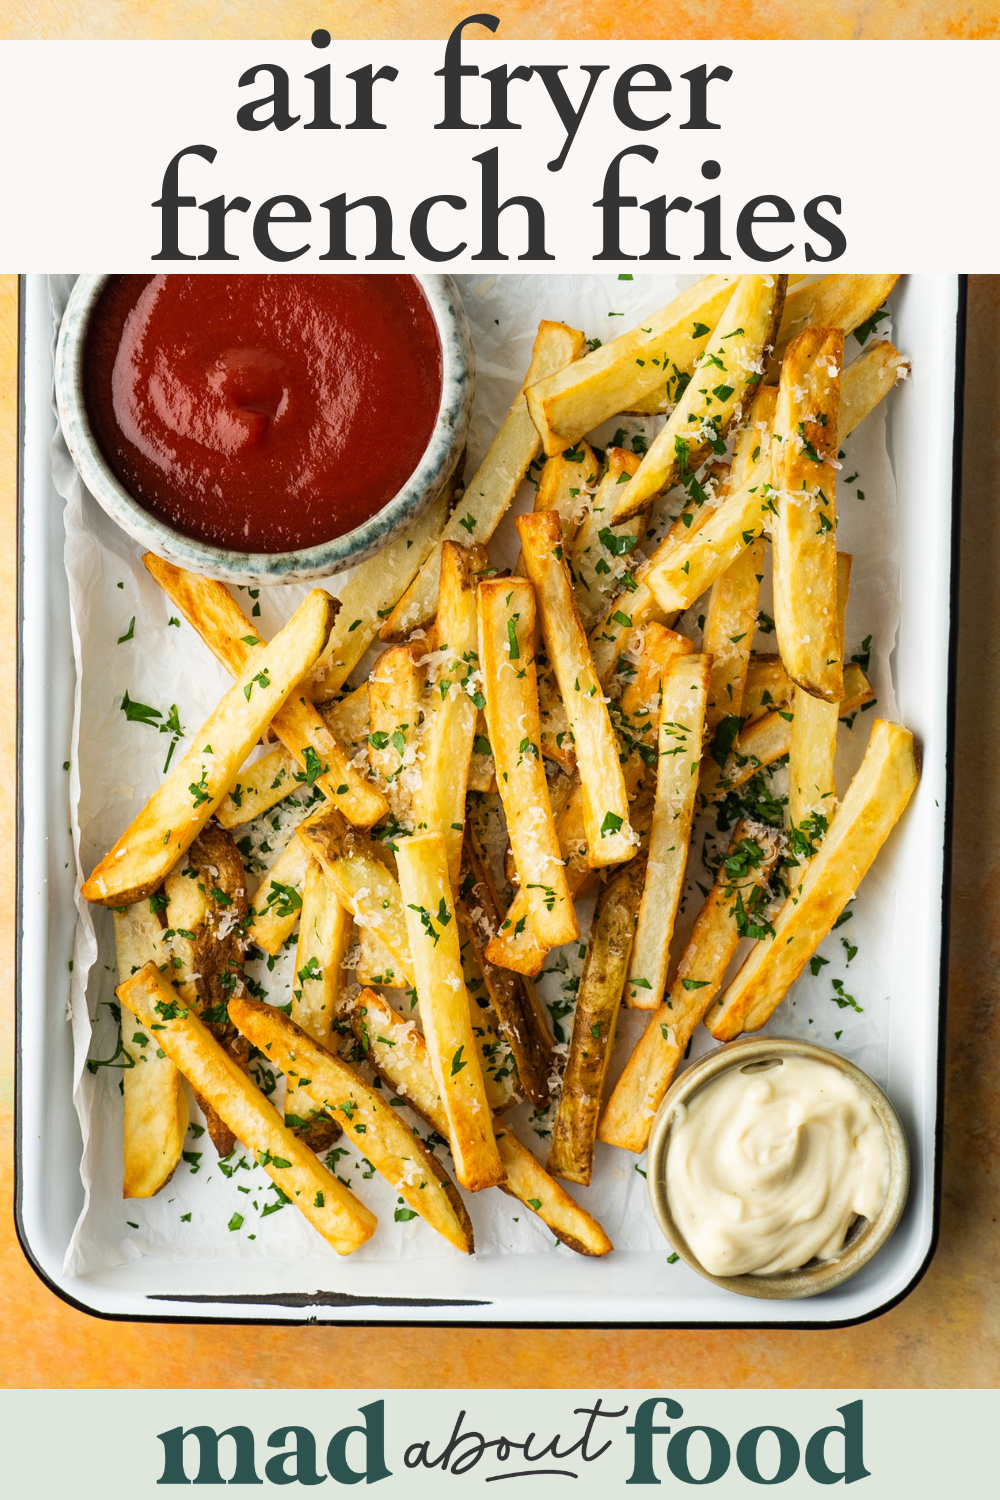 Image for pinning Air Fryer French Fries recipe on Pinterest